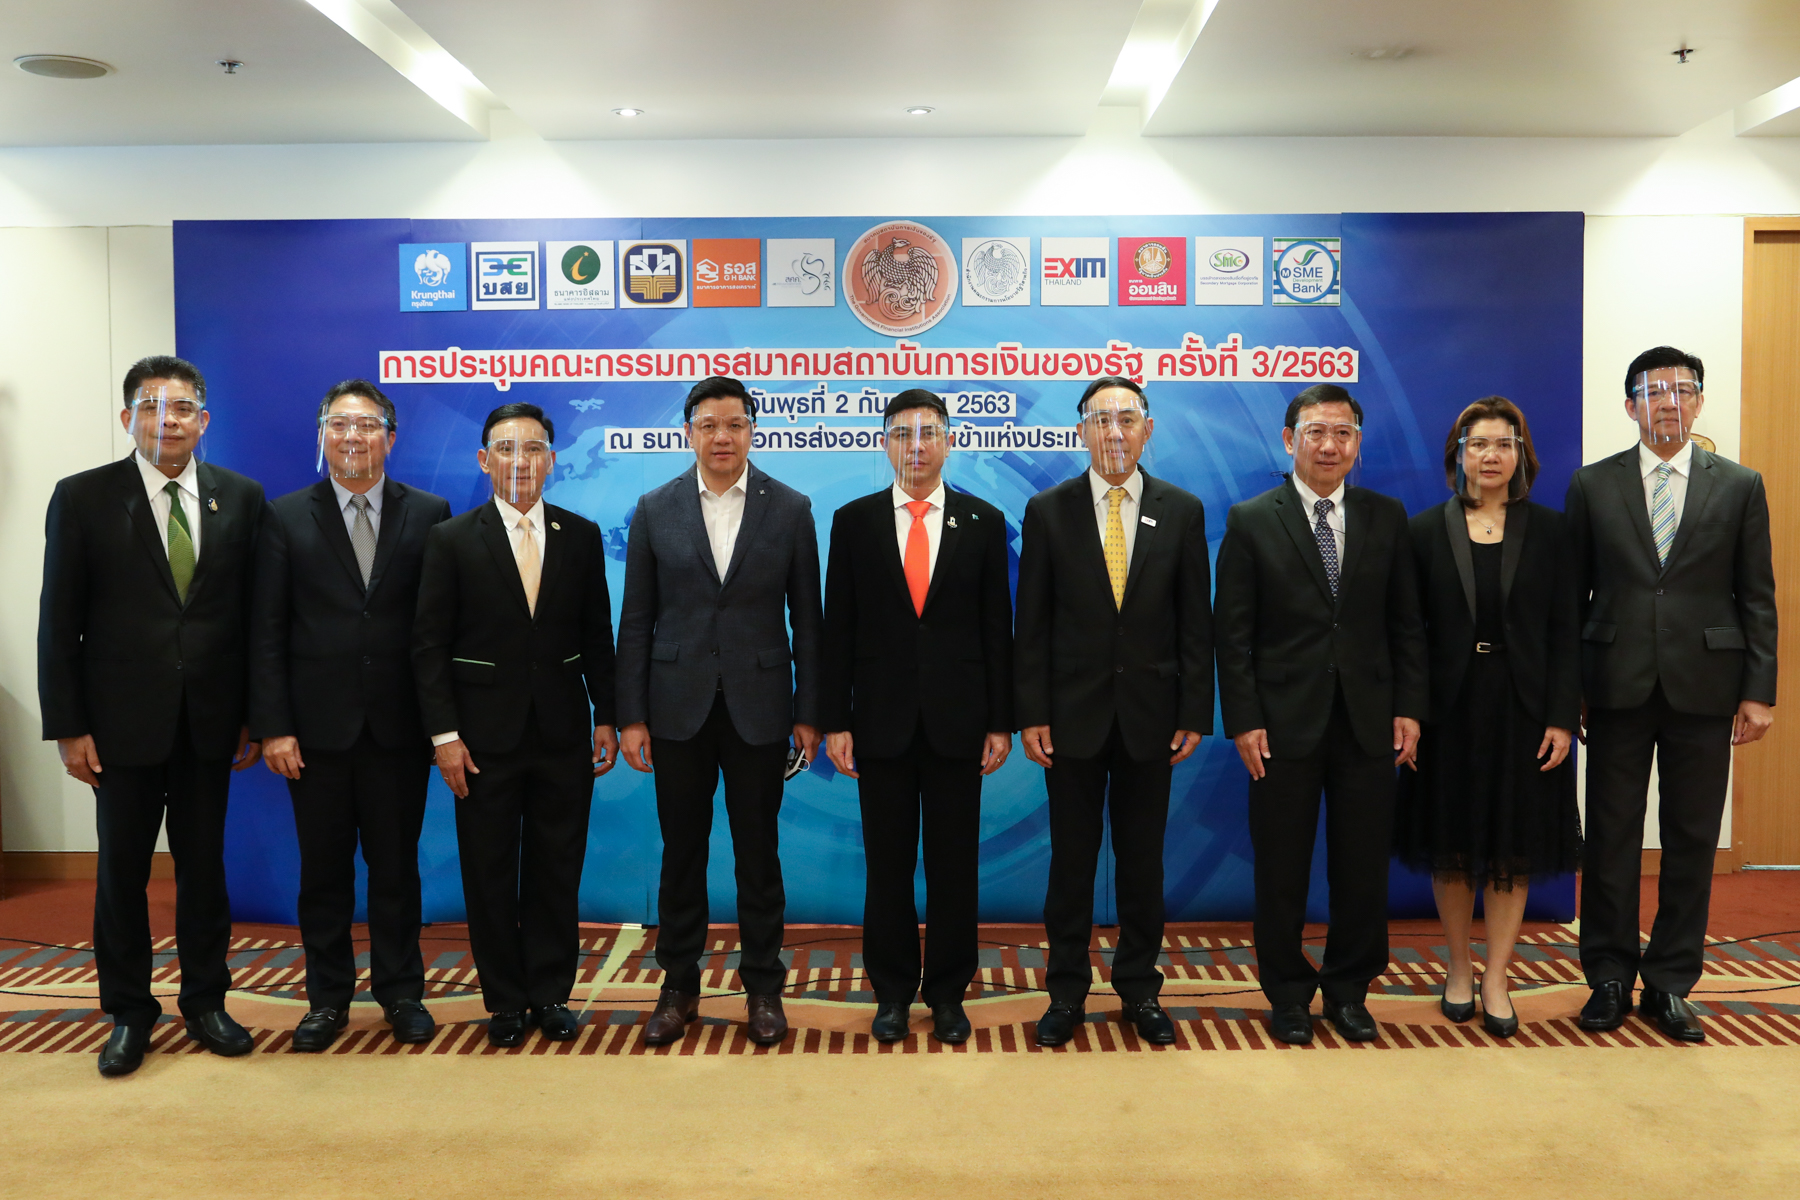 EXIM Thailand Hosts the 3rd Meeting of Government Financial Institutions Association in 2020